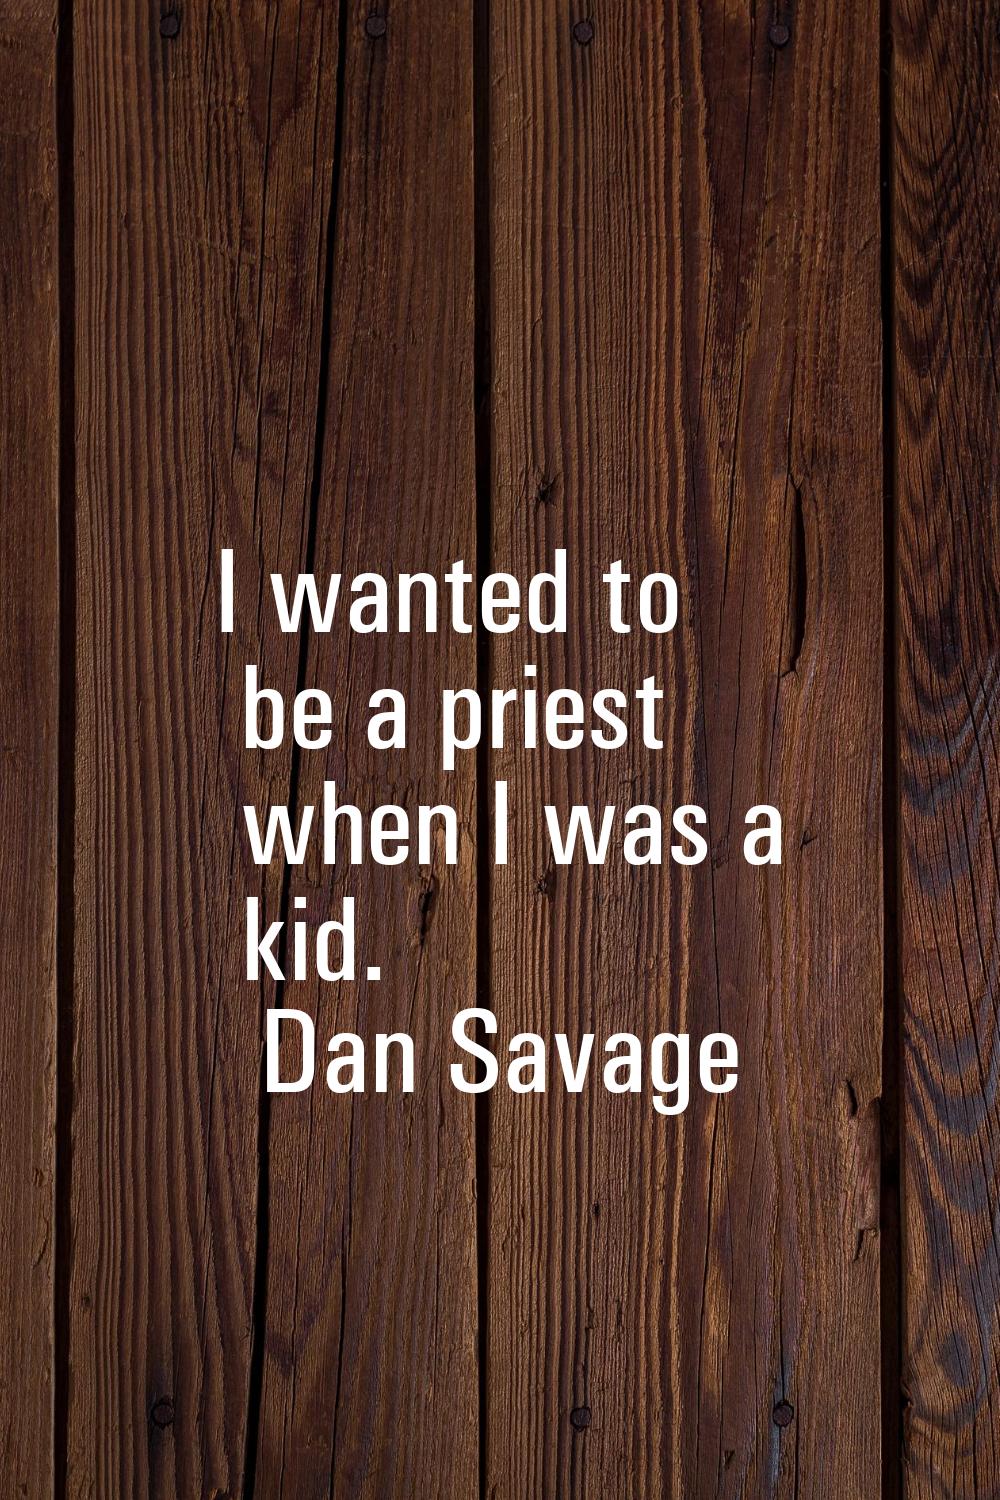 I wanted to be a priest when I was a kid.